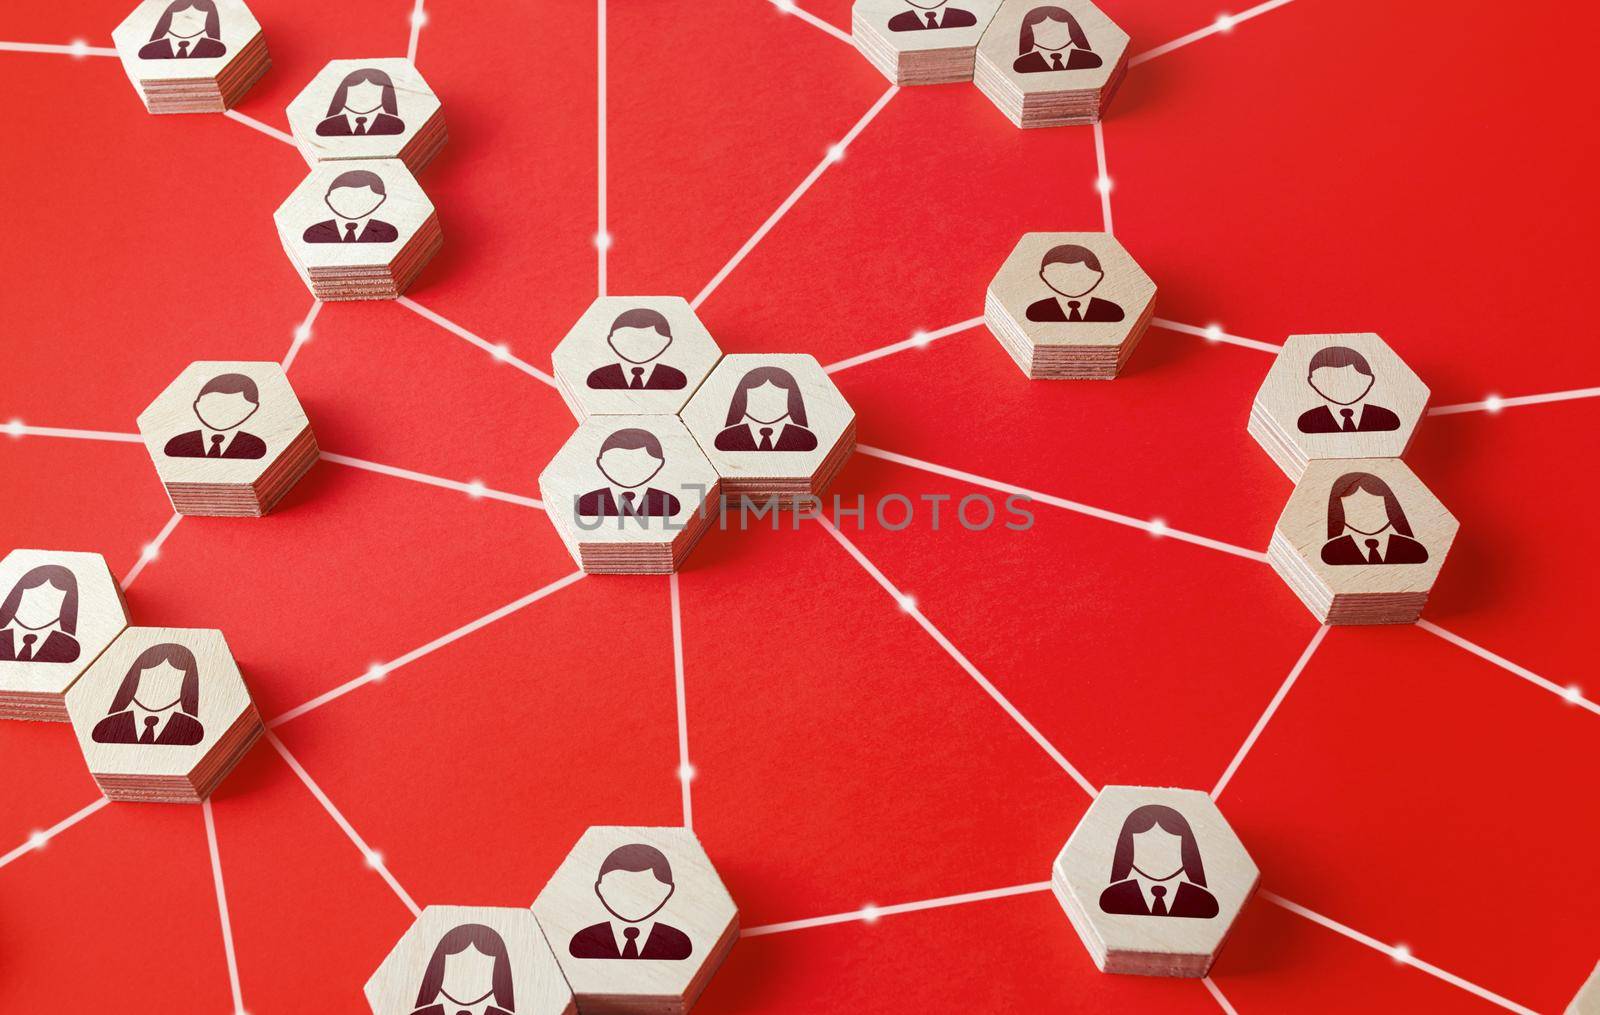 Network of connected people. Communicate interactions between working groups. Company networking communication. Partnerships, business relations development. Decentralized hierarchical system. by iLixe48